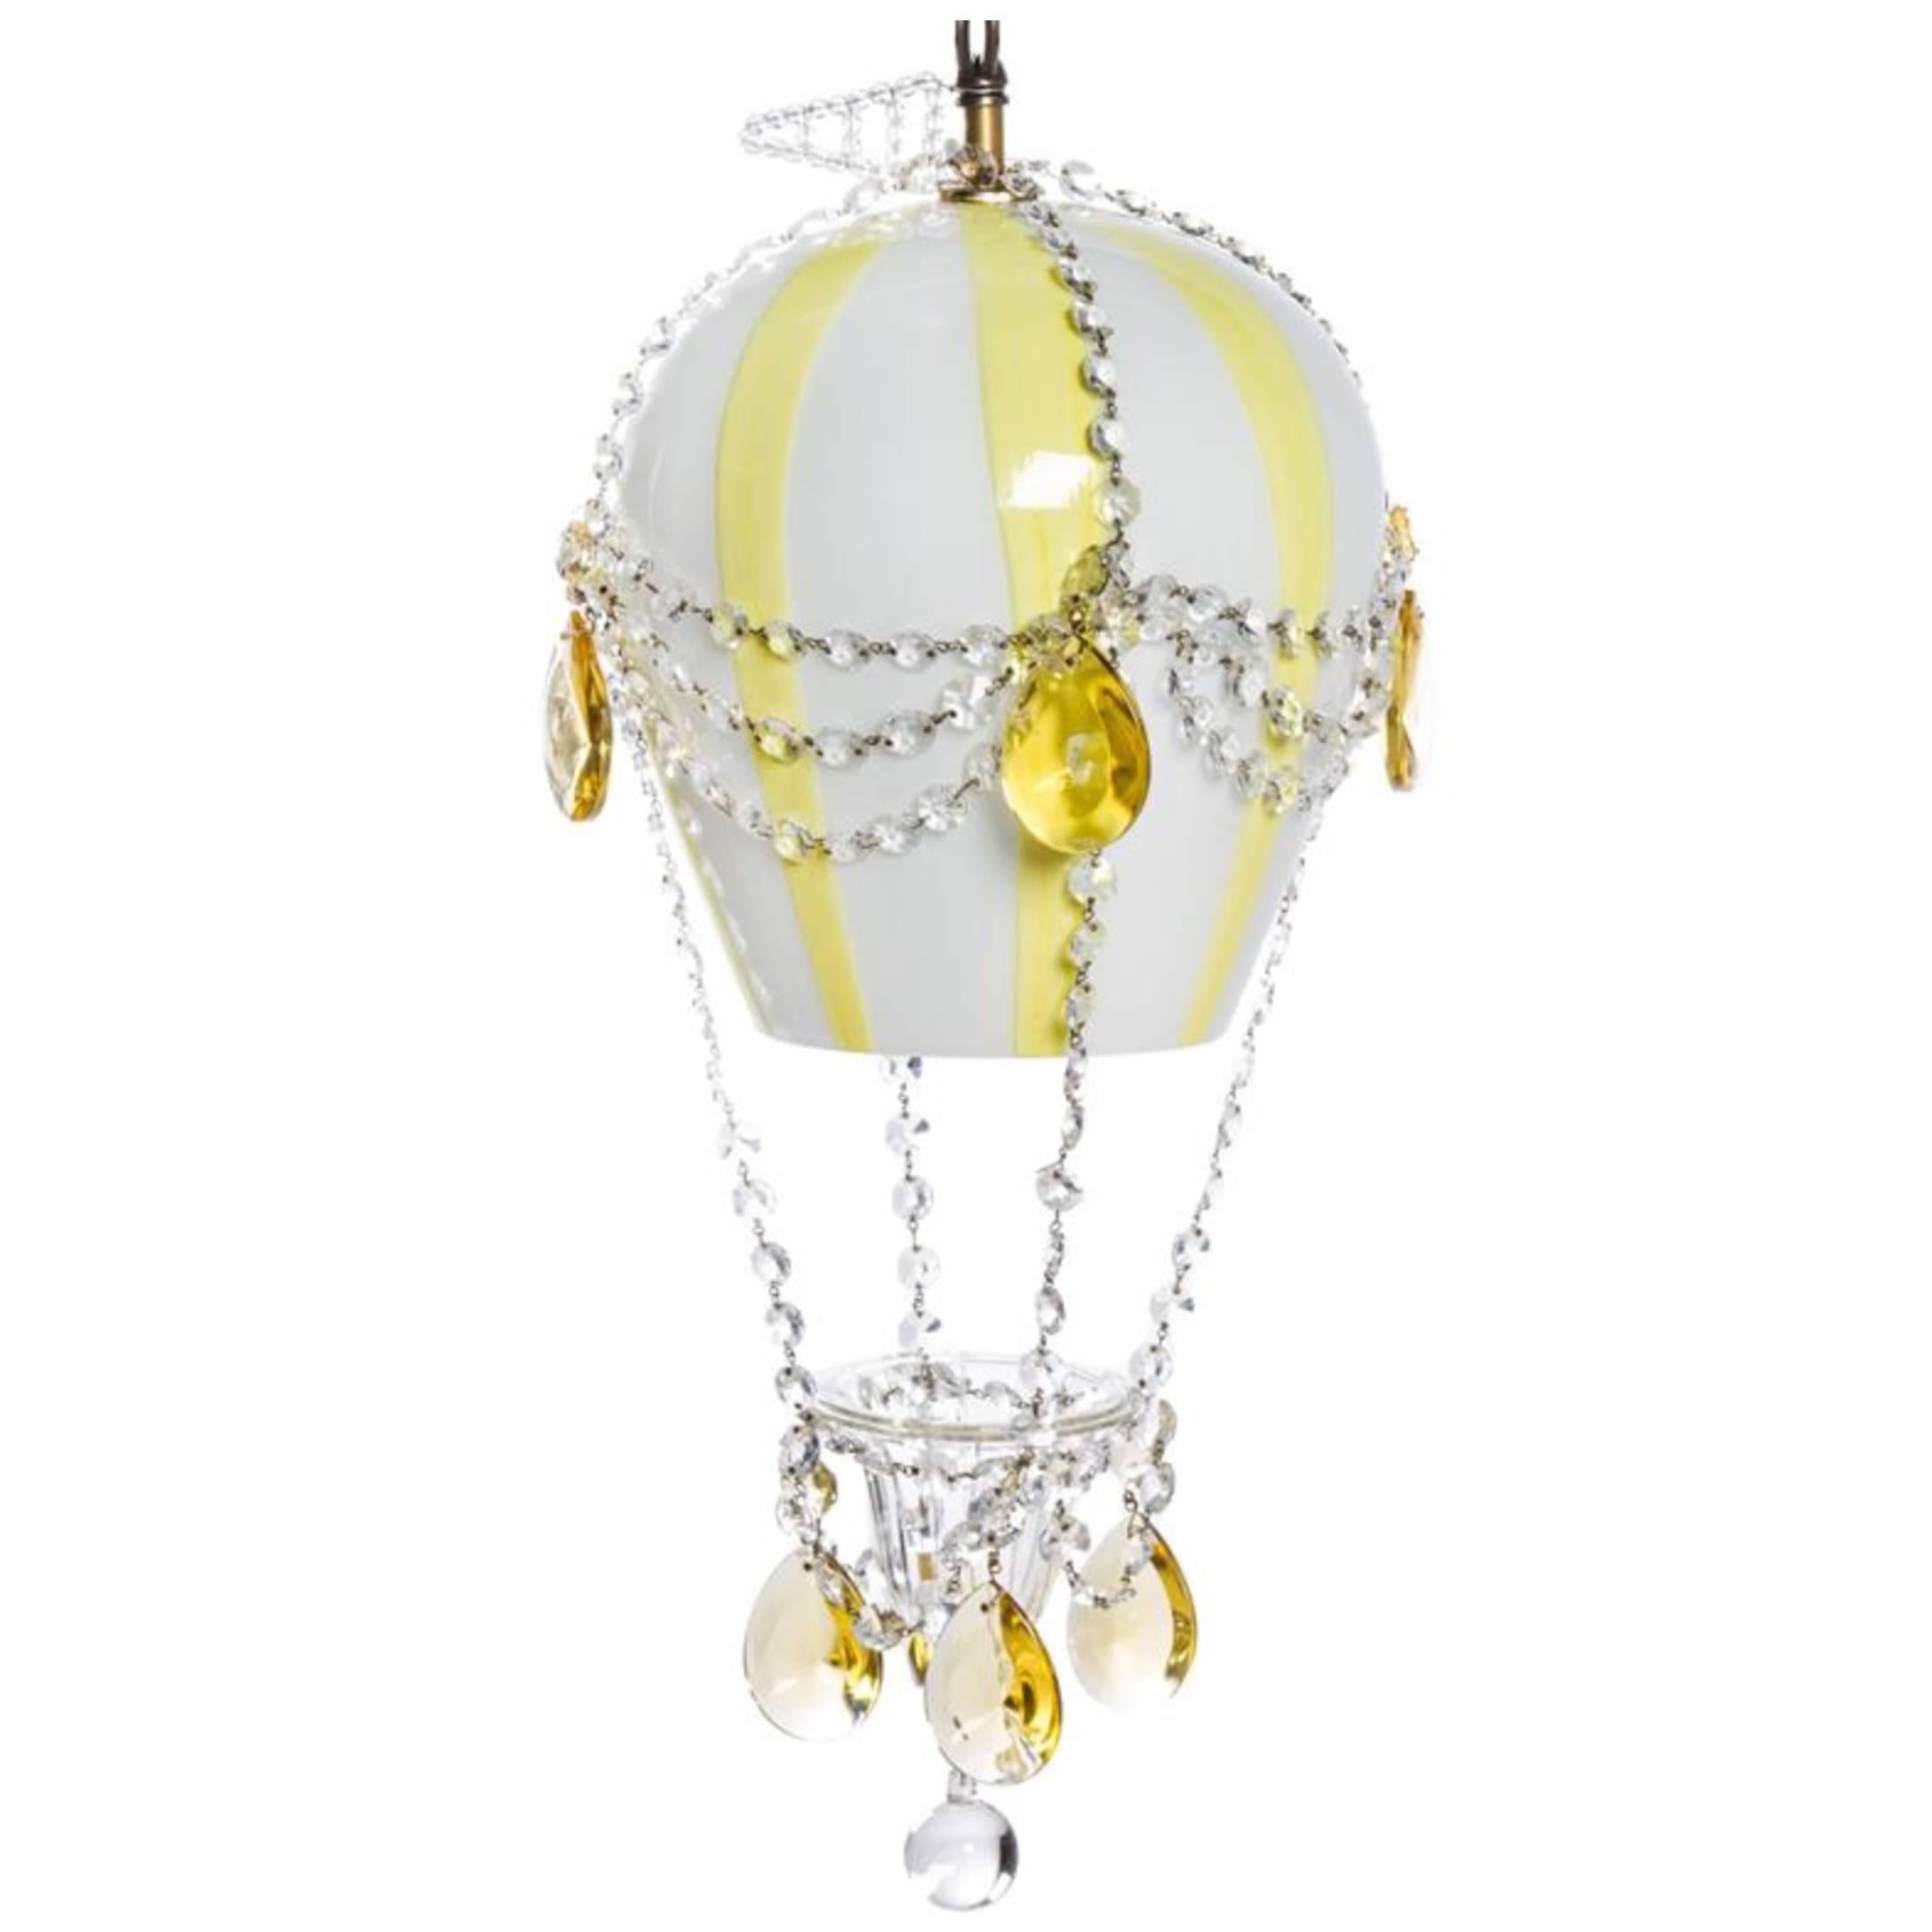 Murano, Glass Single Light Fixture in the Form of Hot Air Balloon